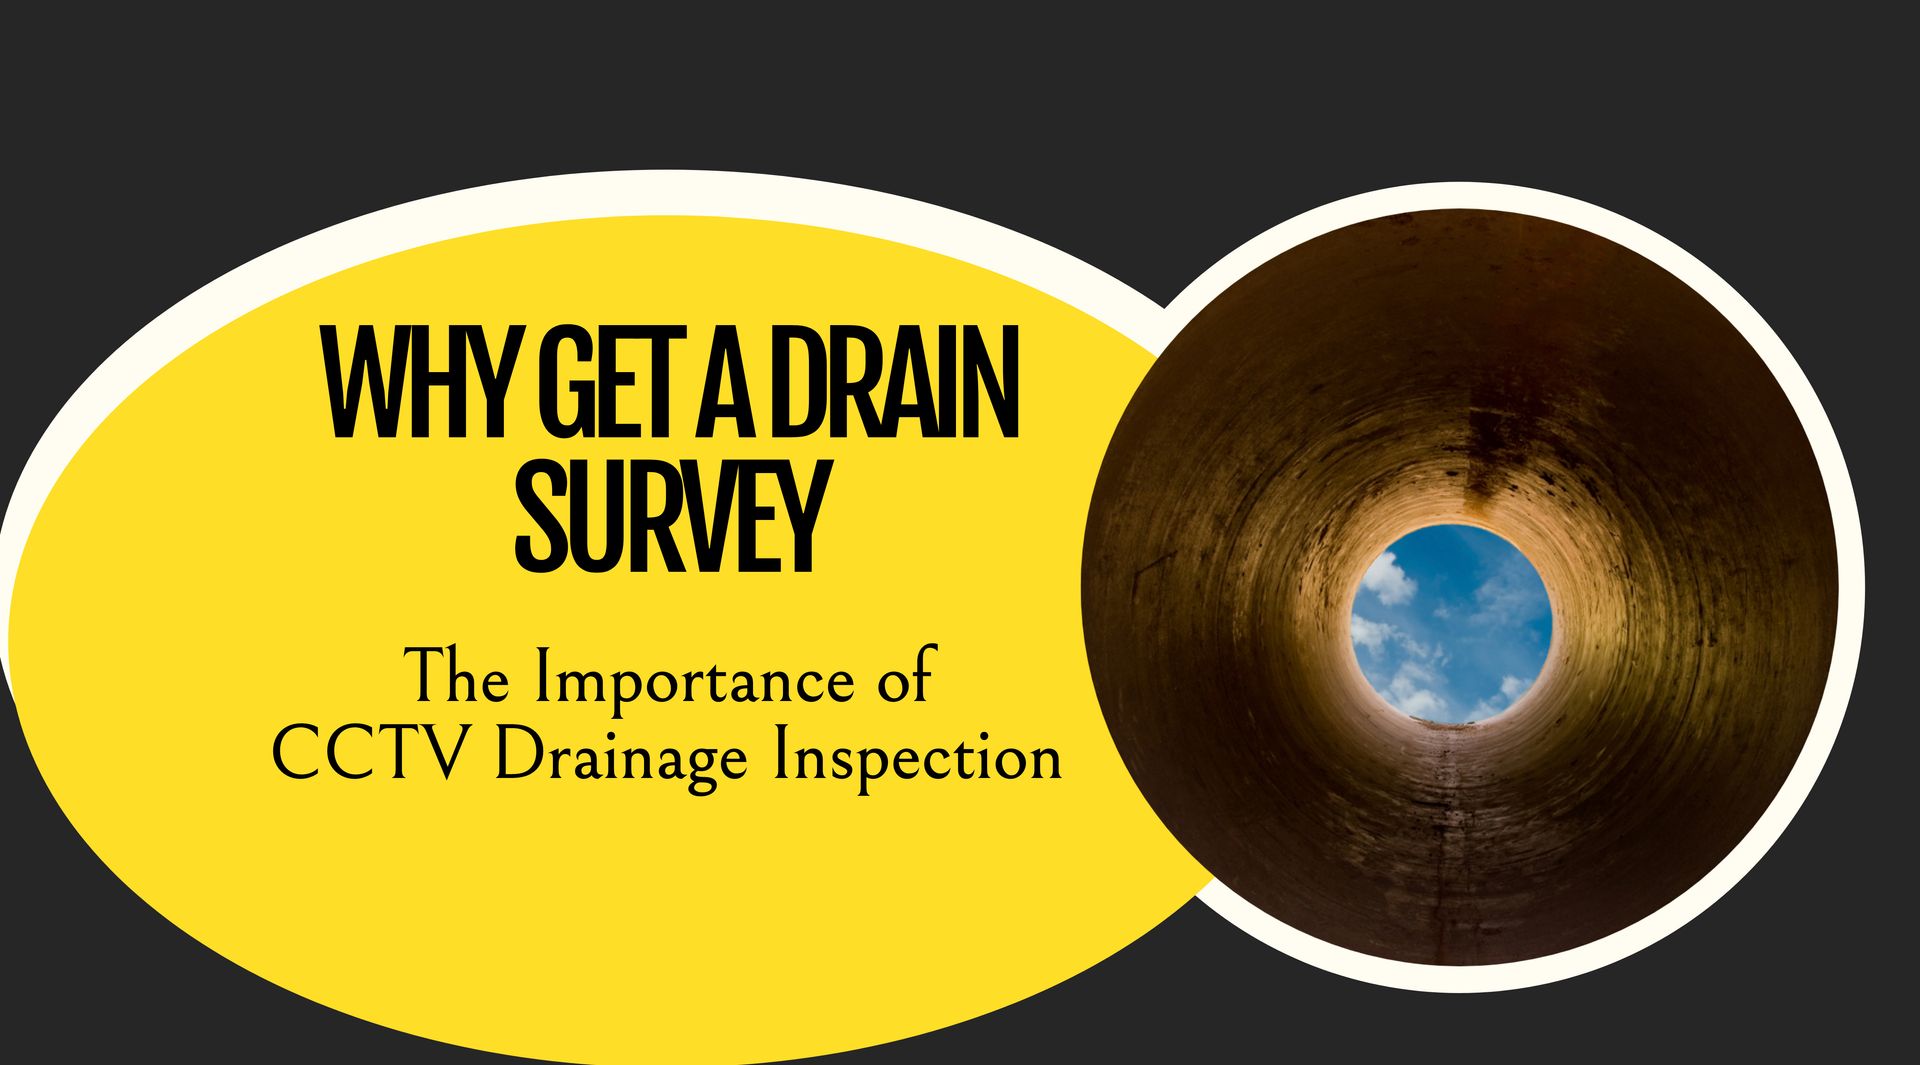 Why Get a Drain Survey? The Importance of CCTV Drainage Inspection